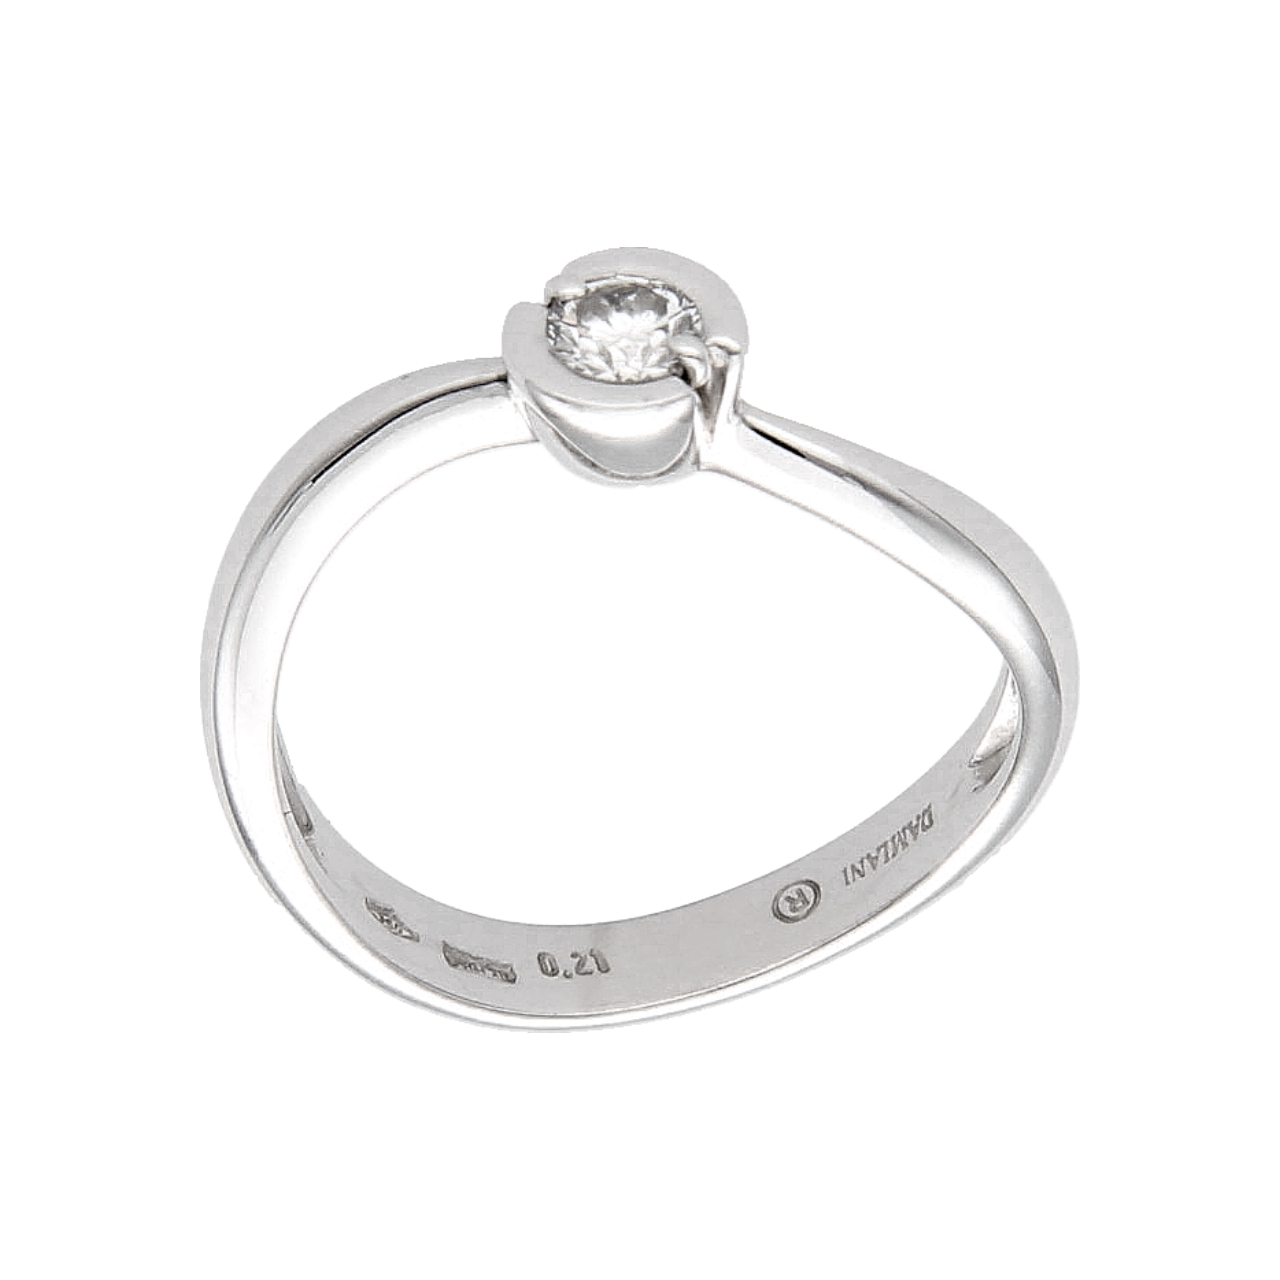 Damiani White Gold Solitaire Ring with 0.21 ct. Diamond VVS1/F